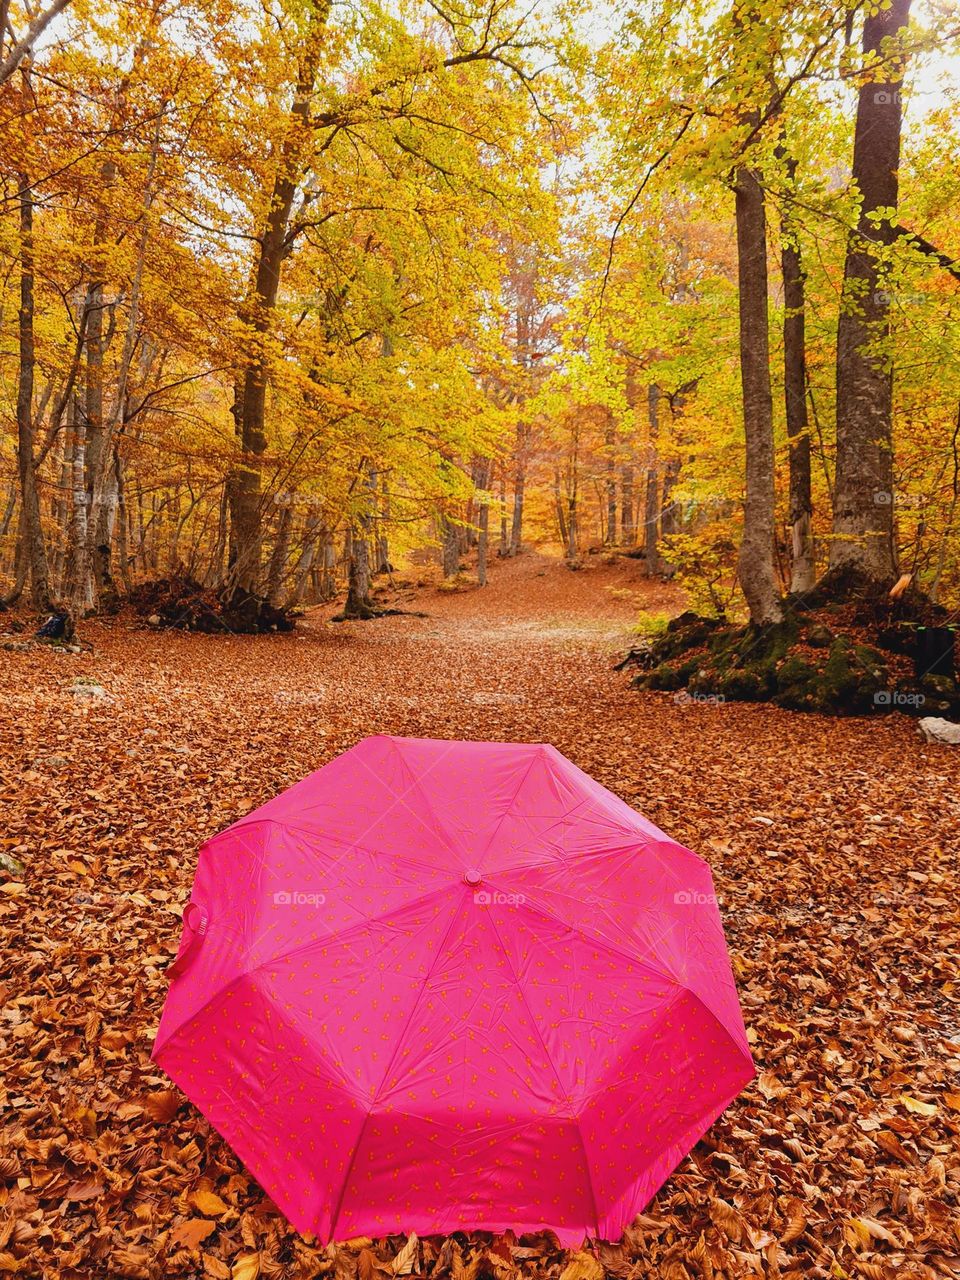 fuchsia-colored open umbrella immersed in the autumn colors of the forest